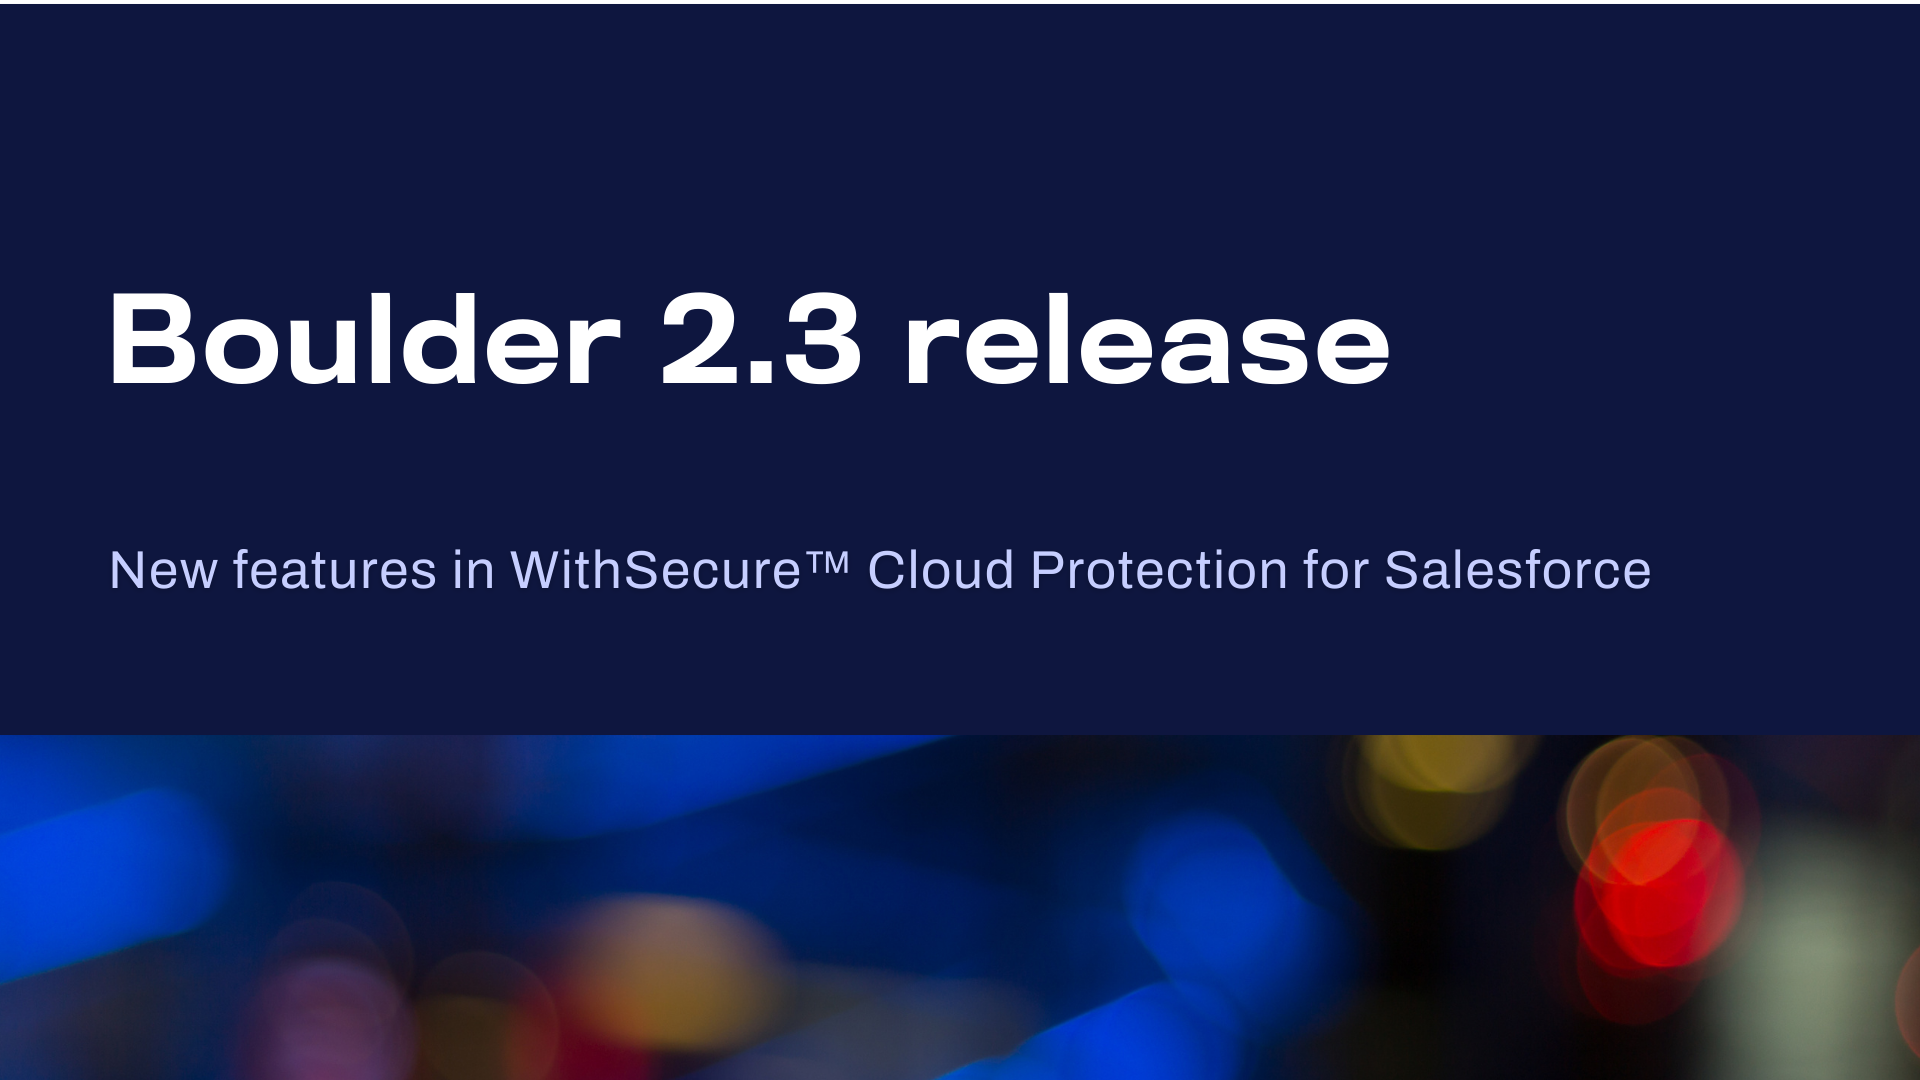 What’s new in WithSecure™ Cloud Protection for Salesforce 2.3